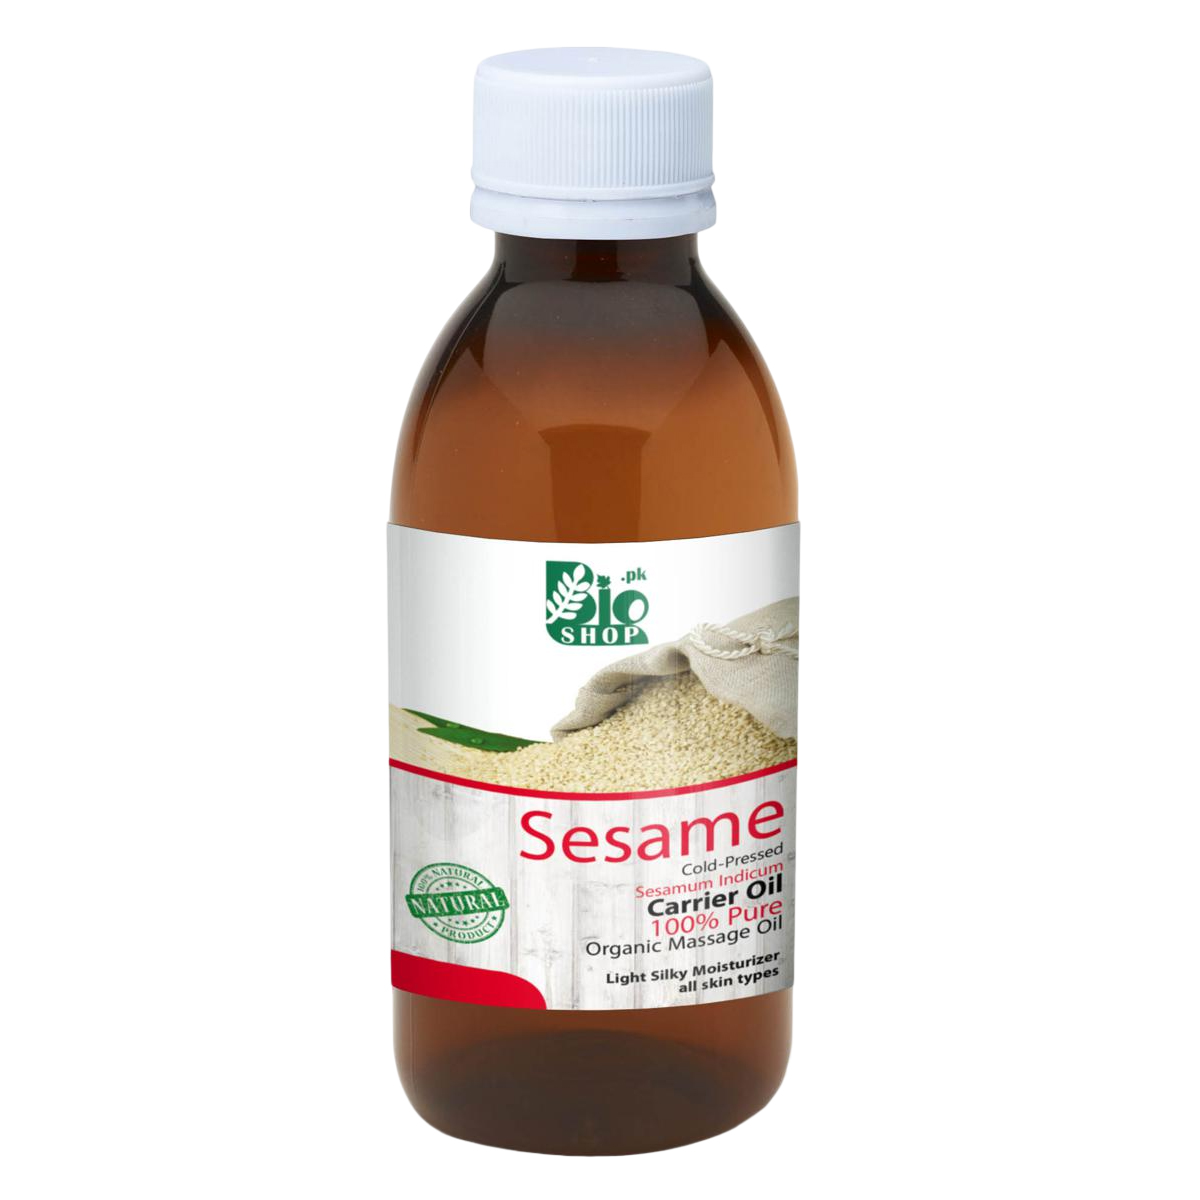 Buy Sesame Oil Cold Pressed Online at Best Price in Pakistan - ChiltanPure